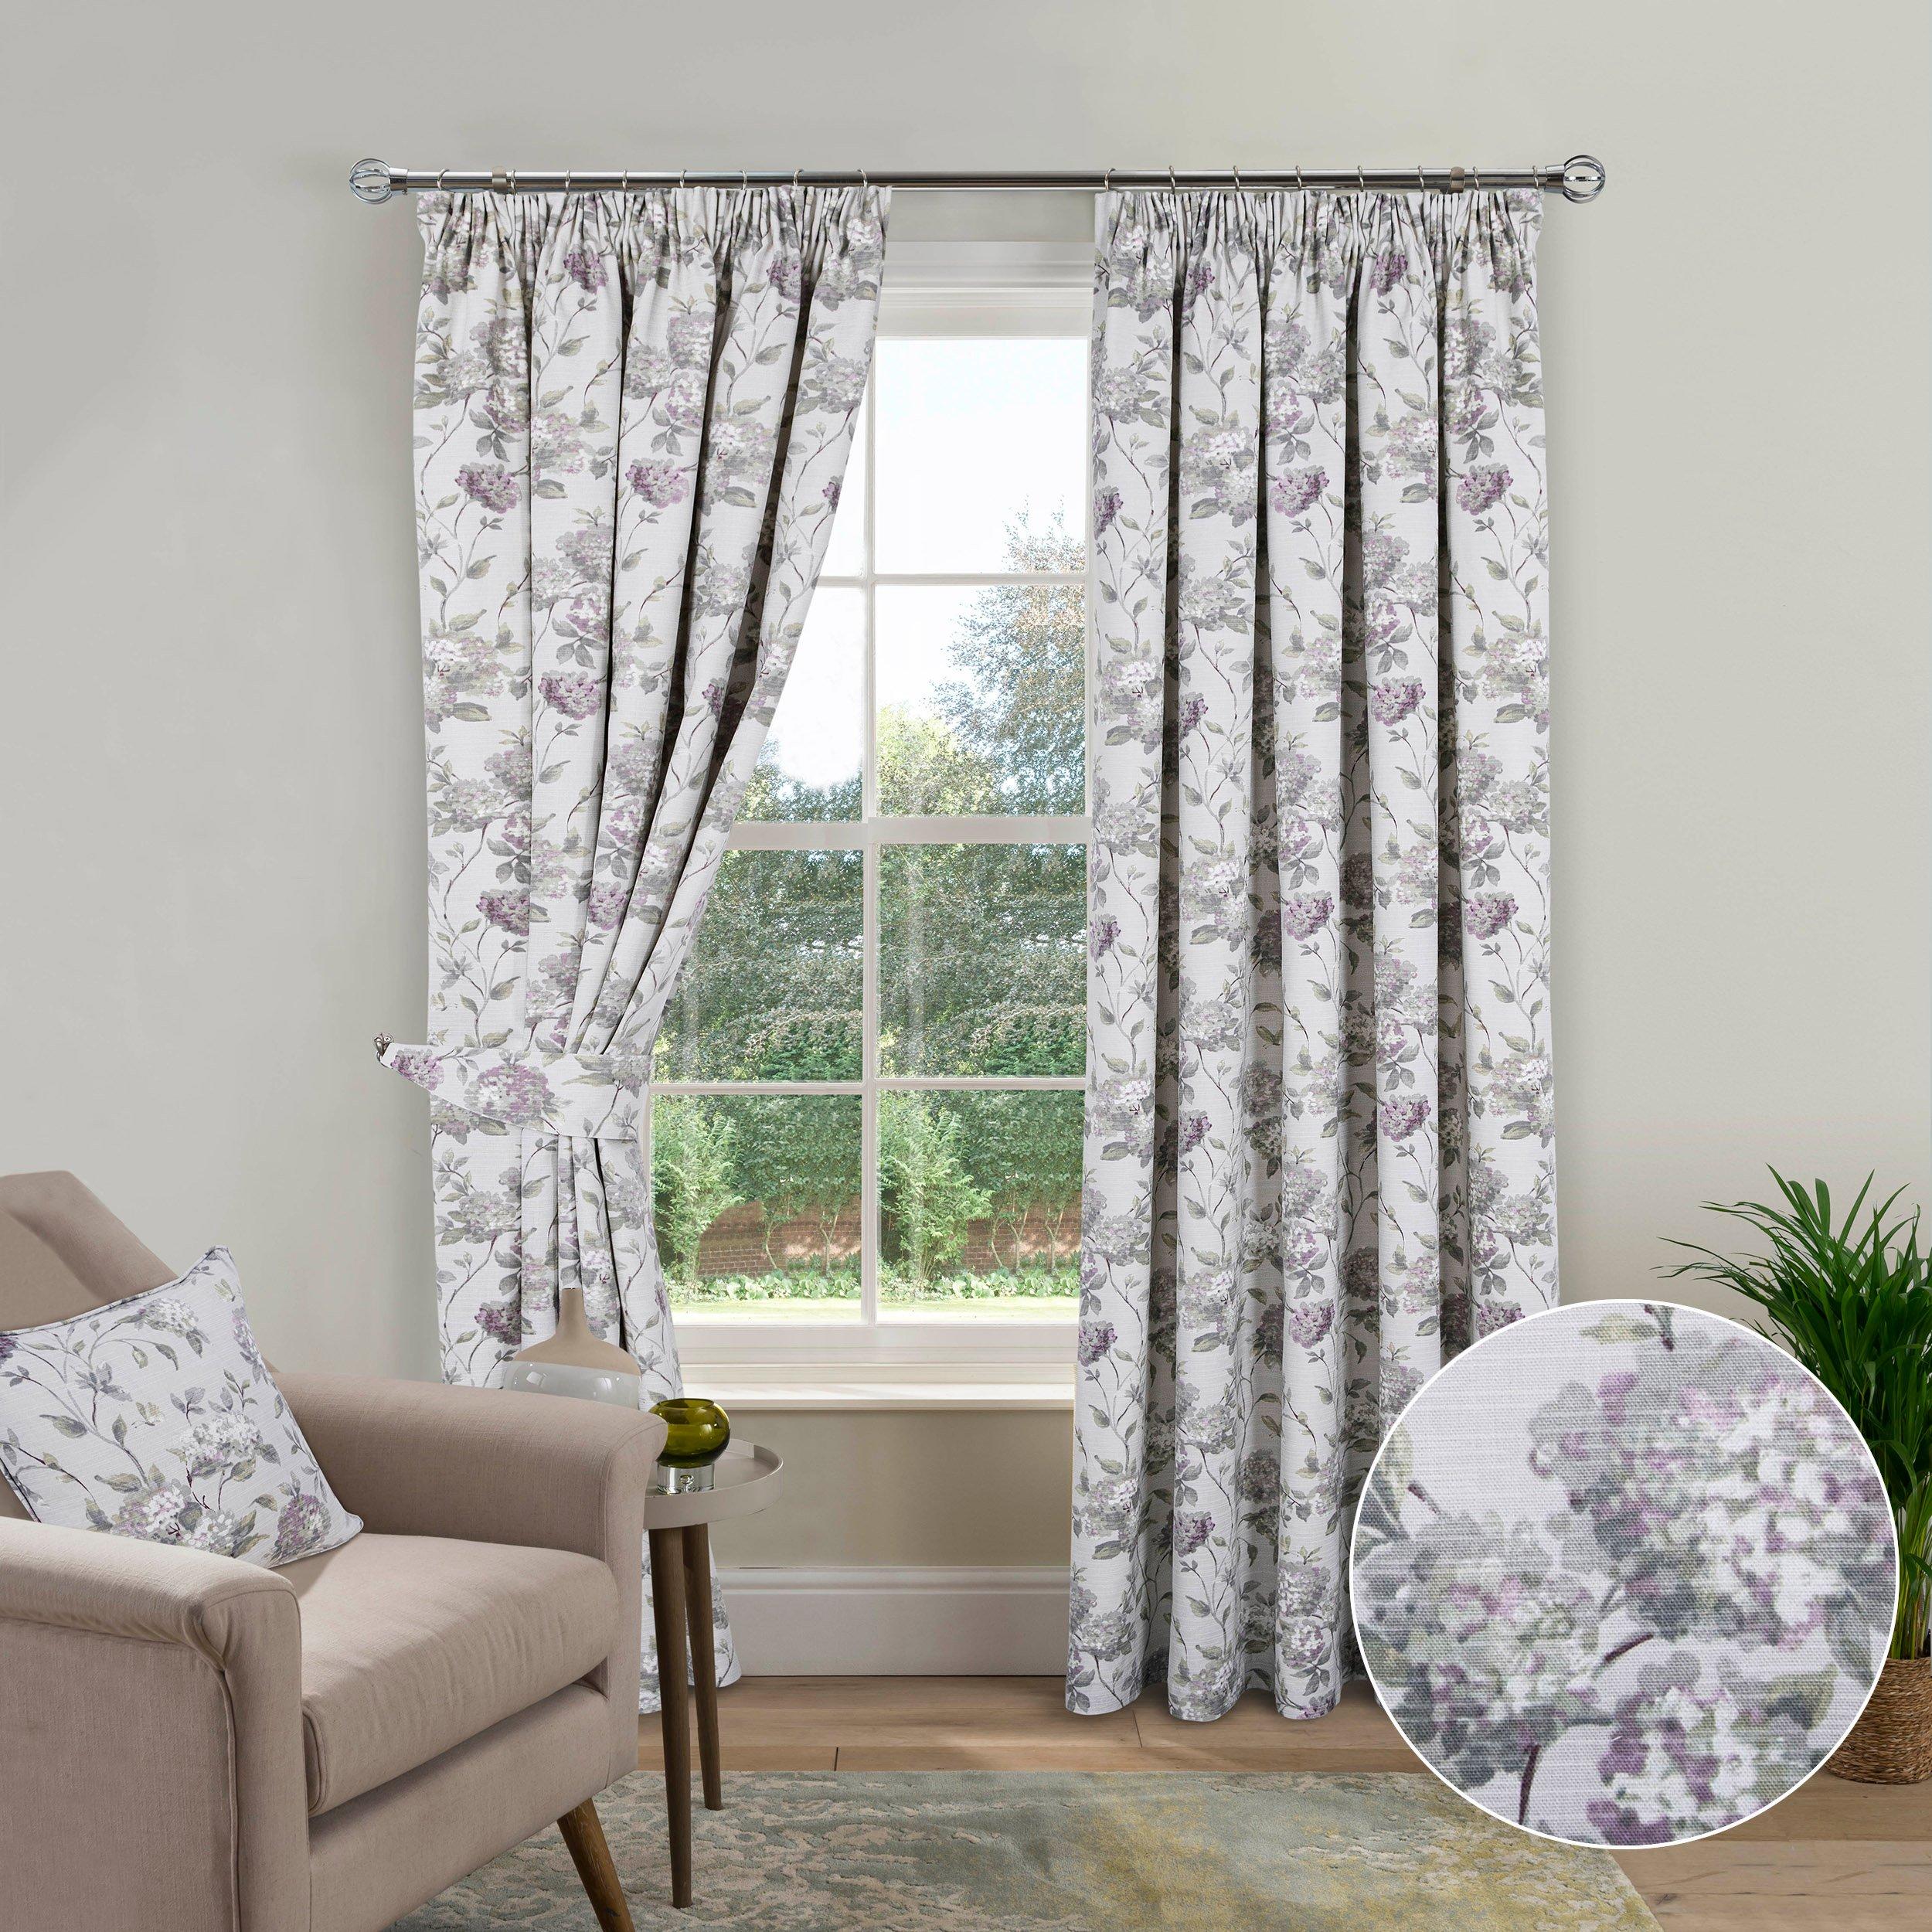 Abbeystead Floral Fully Lined 3 Inch Pencil Pleat Curtains Pair